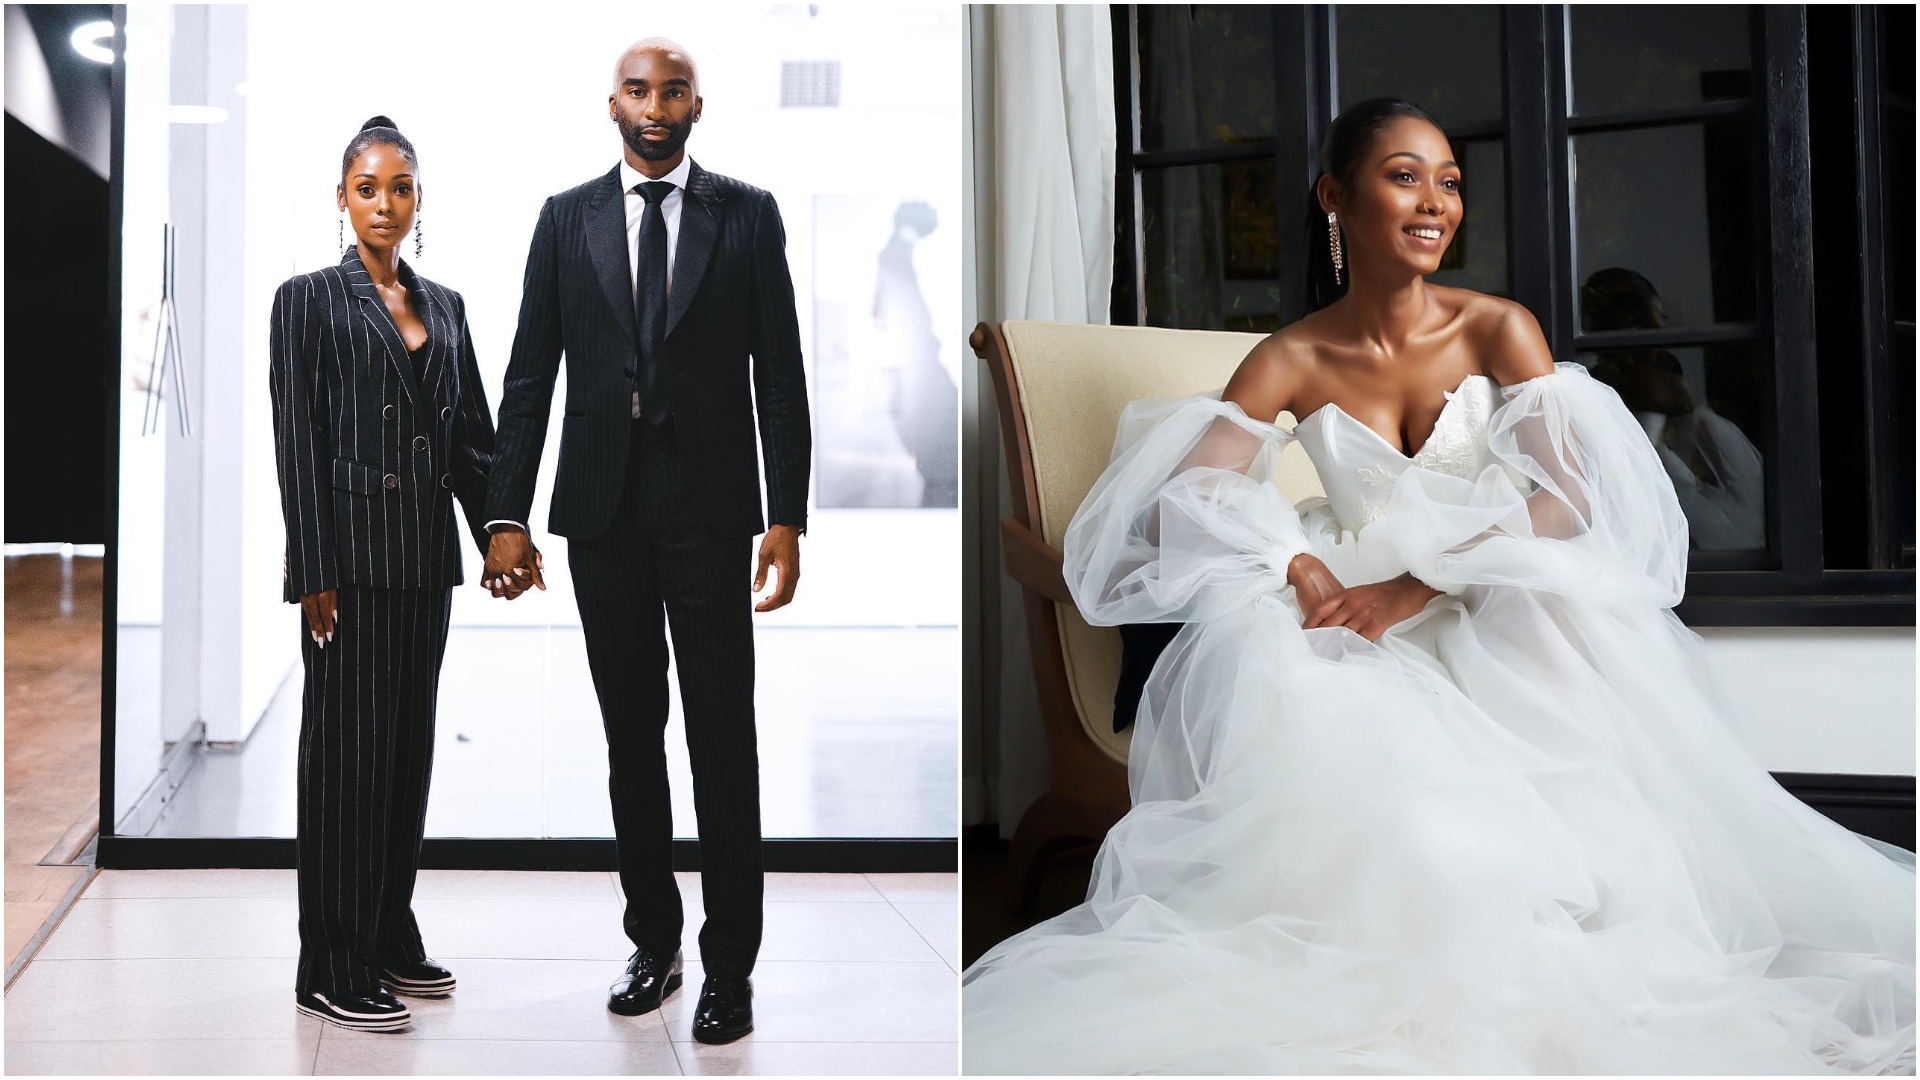 “Bianca Fell For Me, Not The Fame”- Riky Rick Adored His Wife Bianca, Revealed How They Met